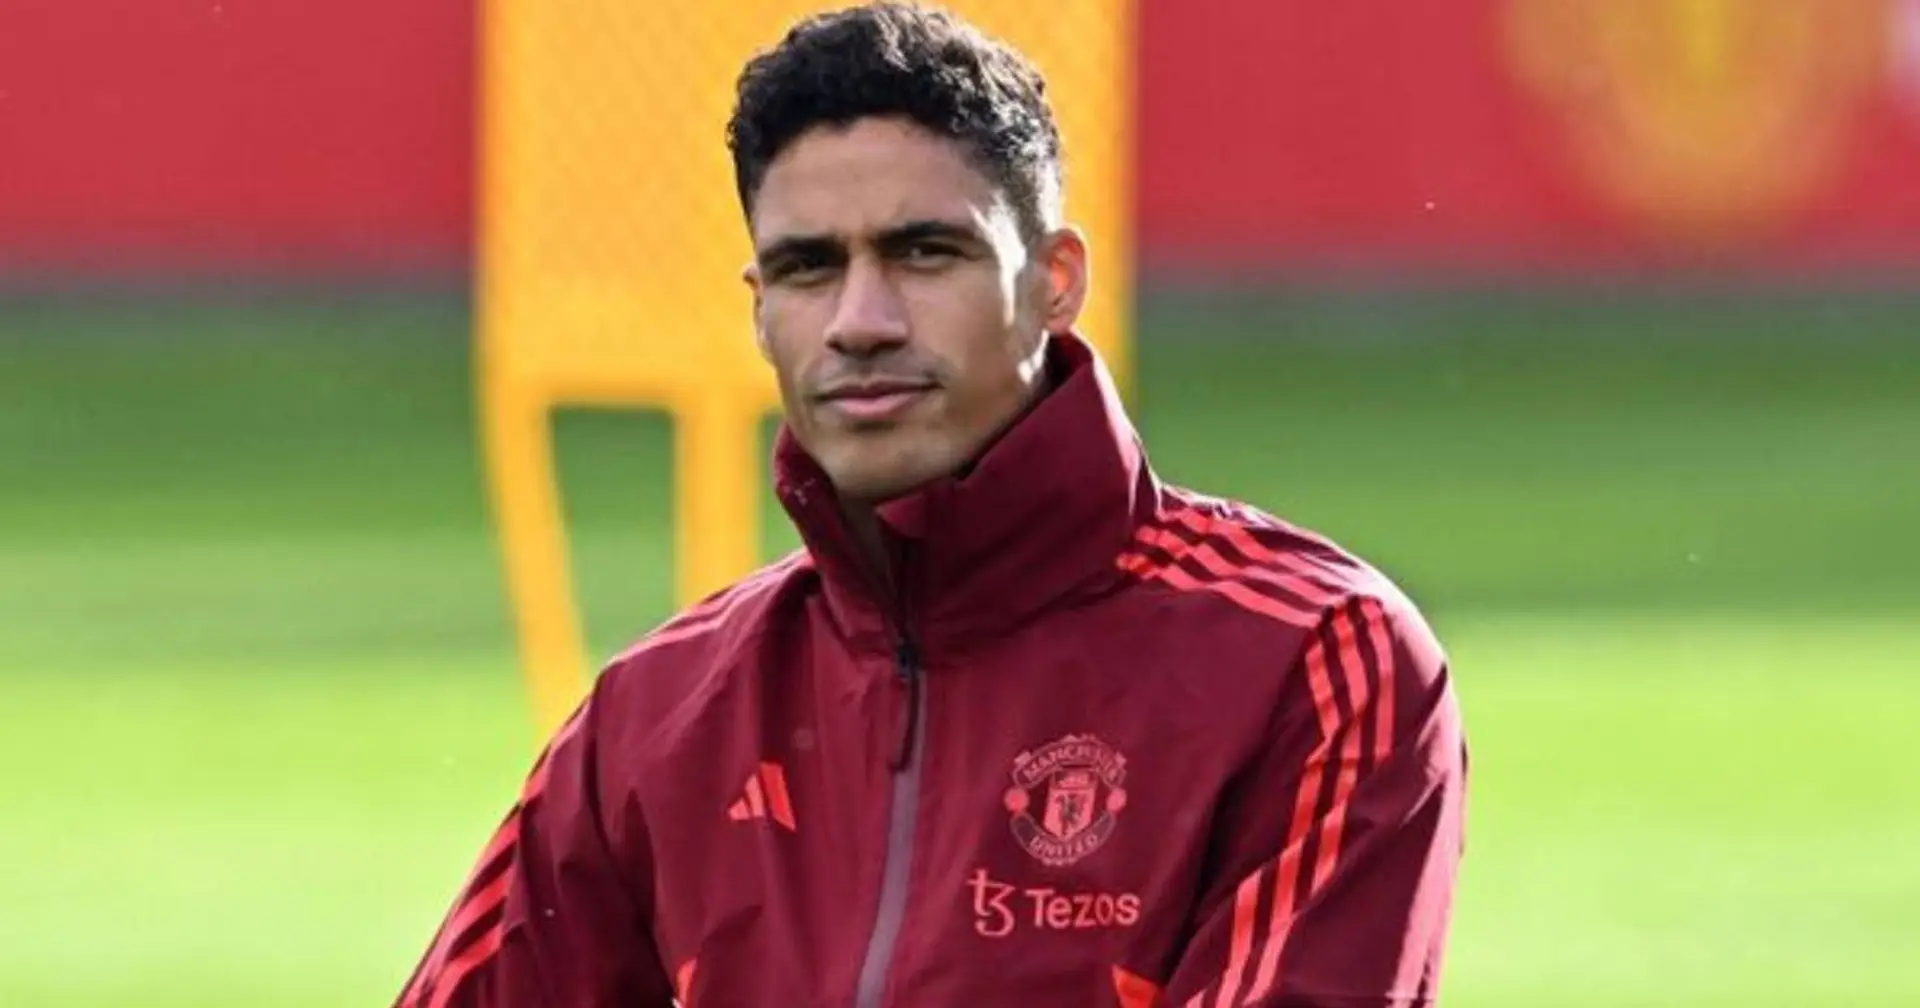 What is your honest opinion on Raphael Varane now?